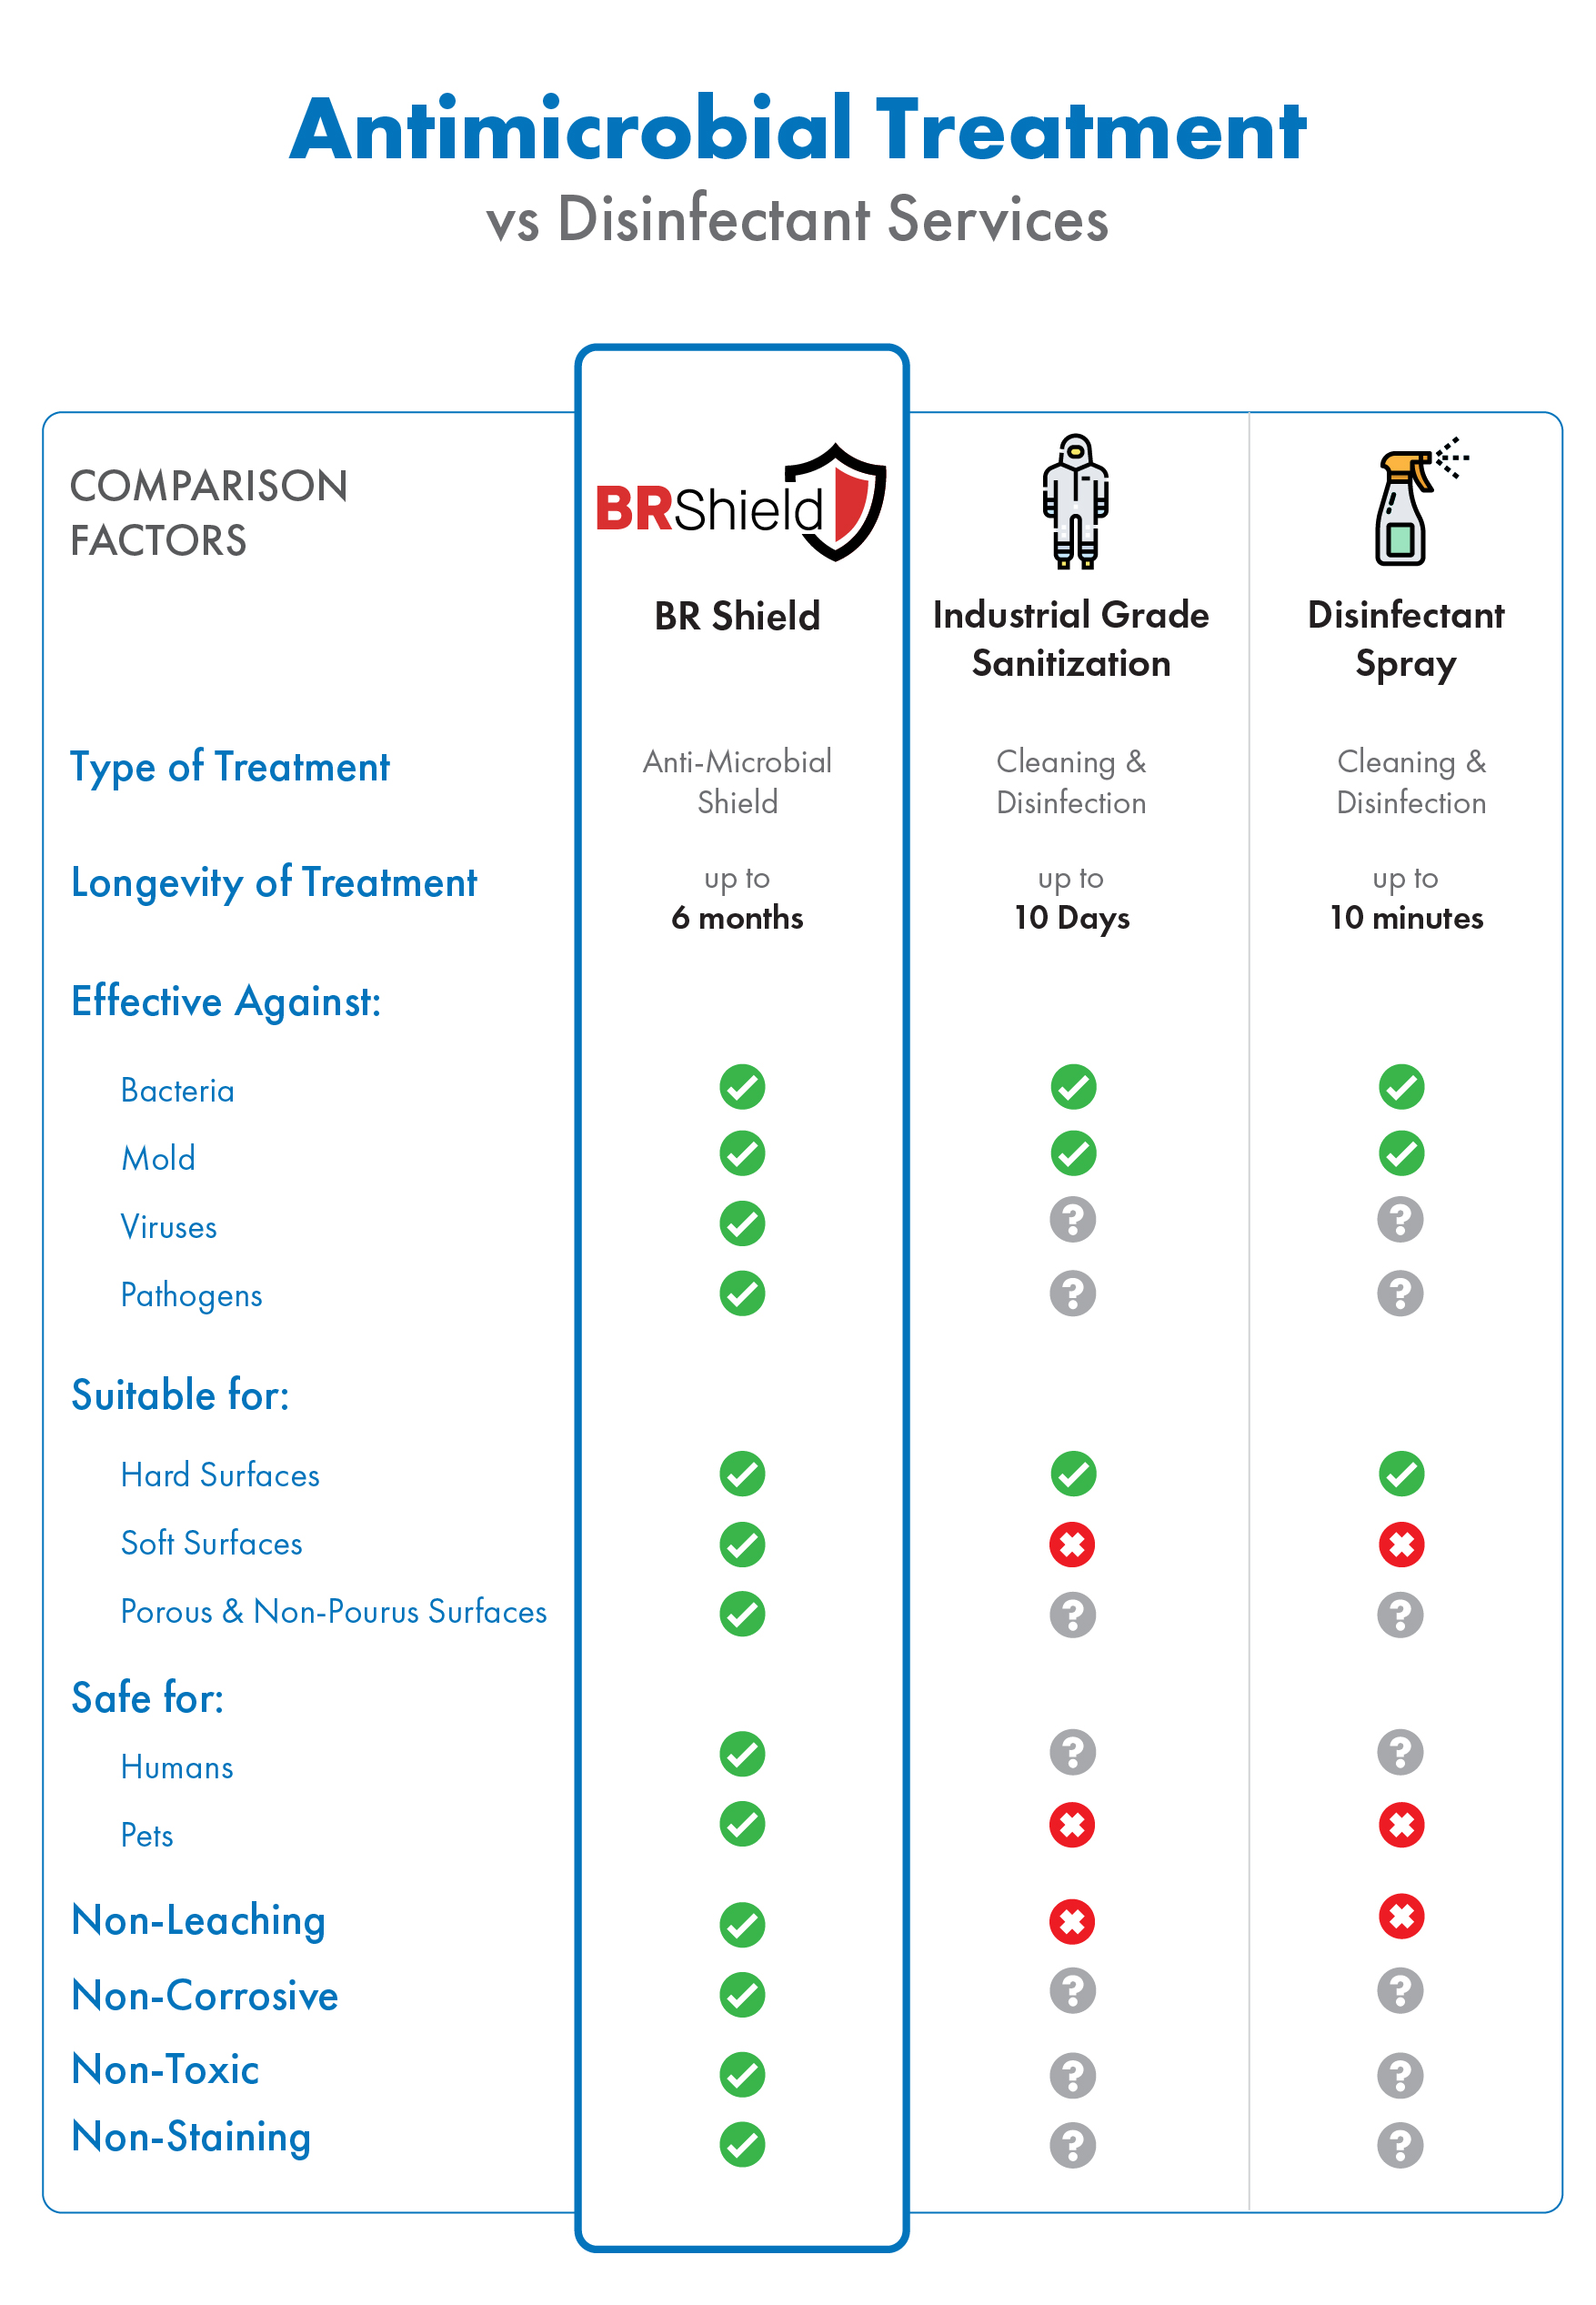 BR Shield Antimicrobial vs Disinfectant Services